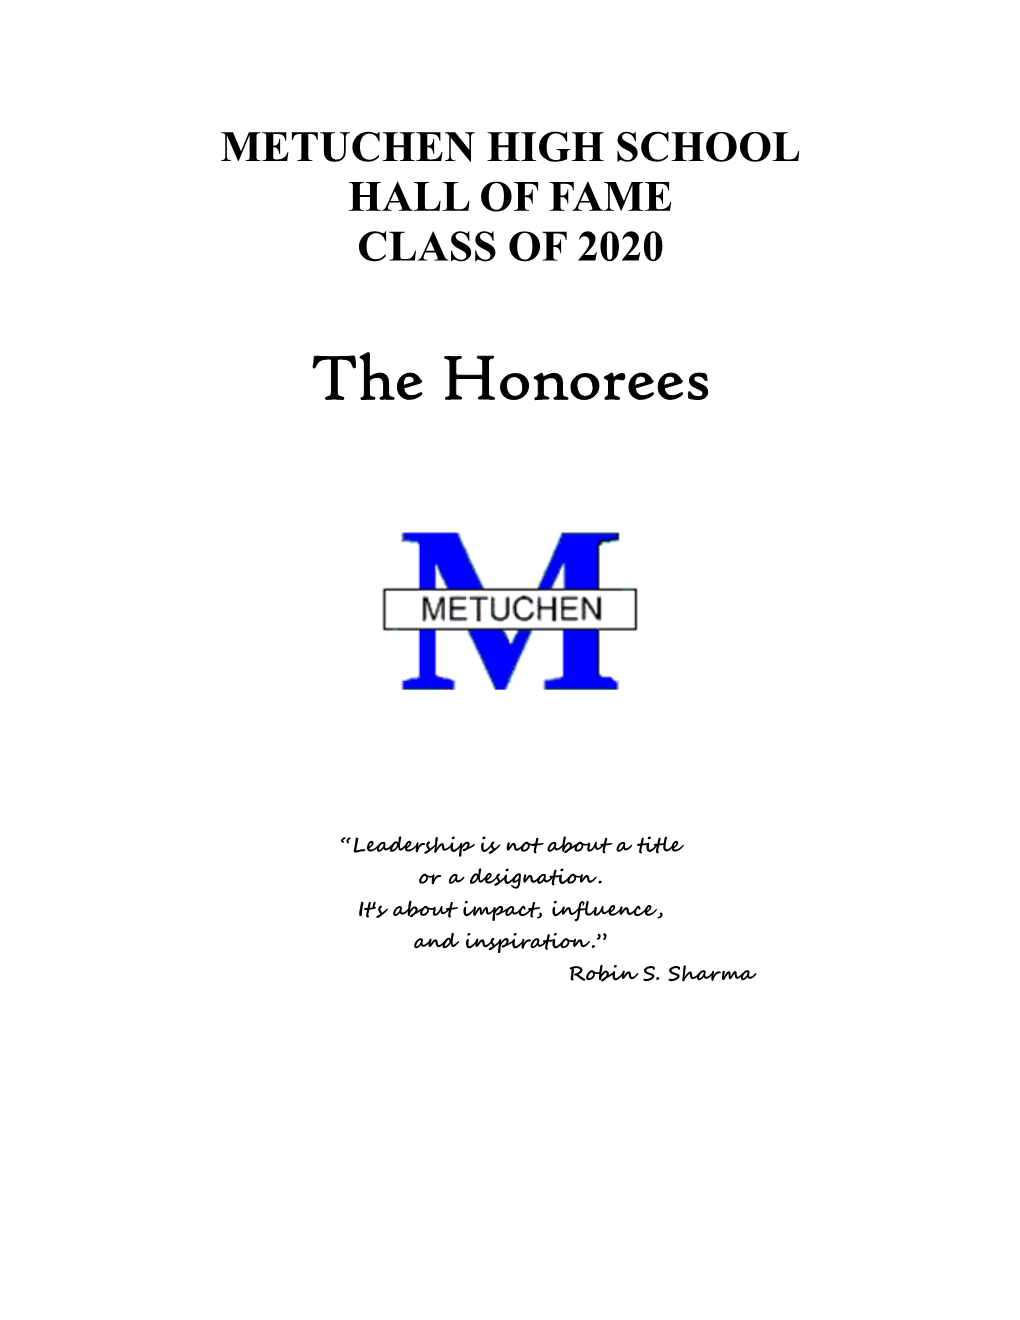 Hall of Fame Class of 2020 Biographies